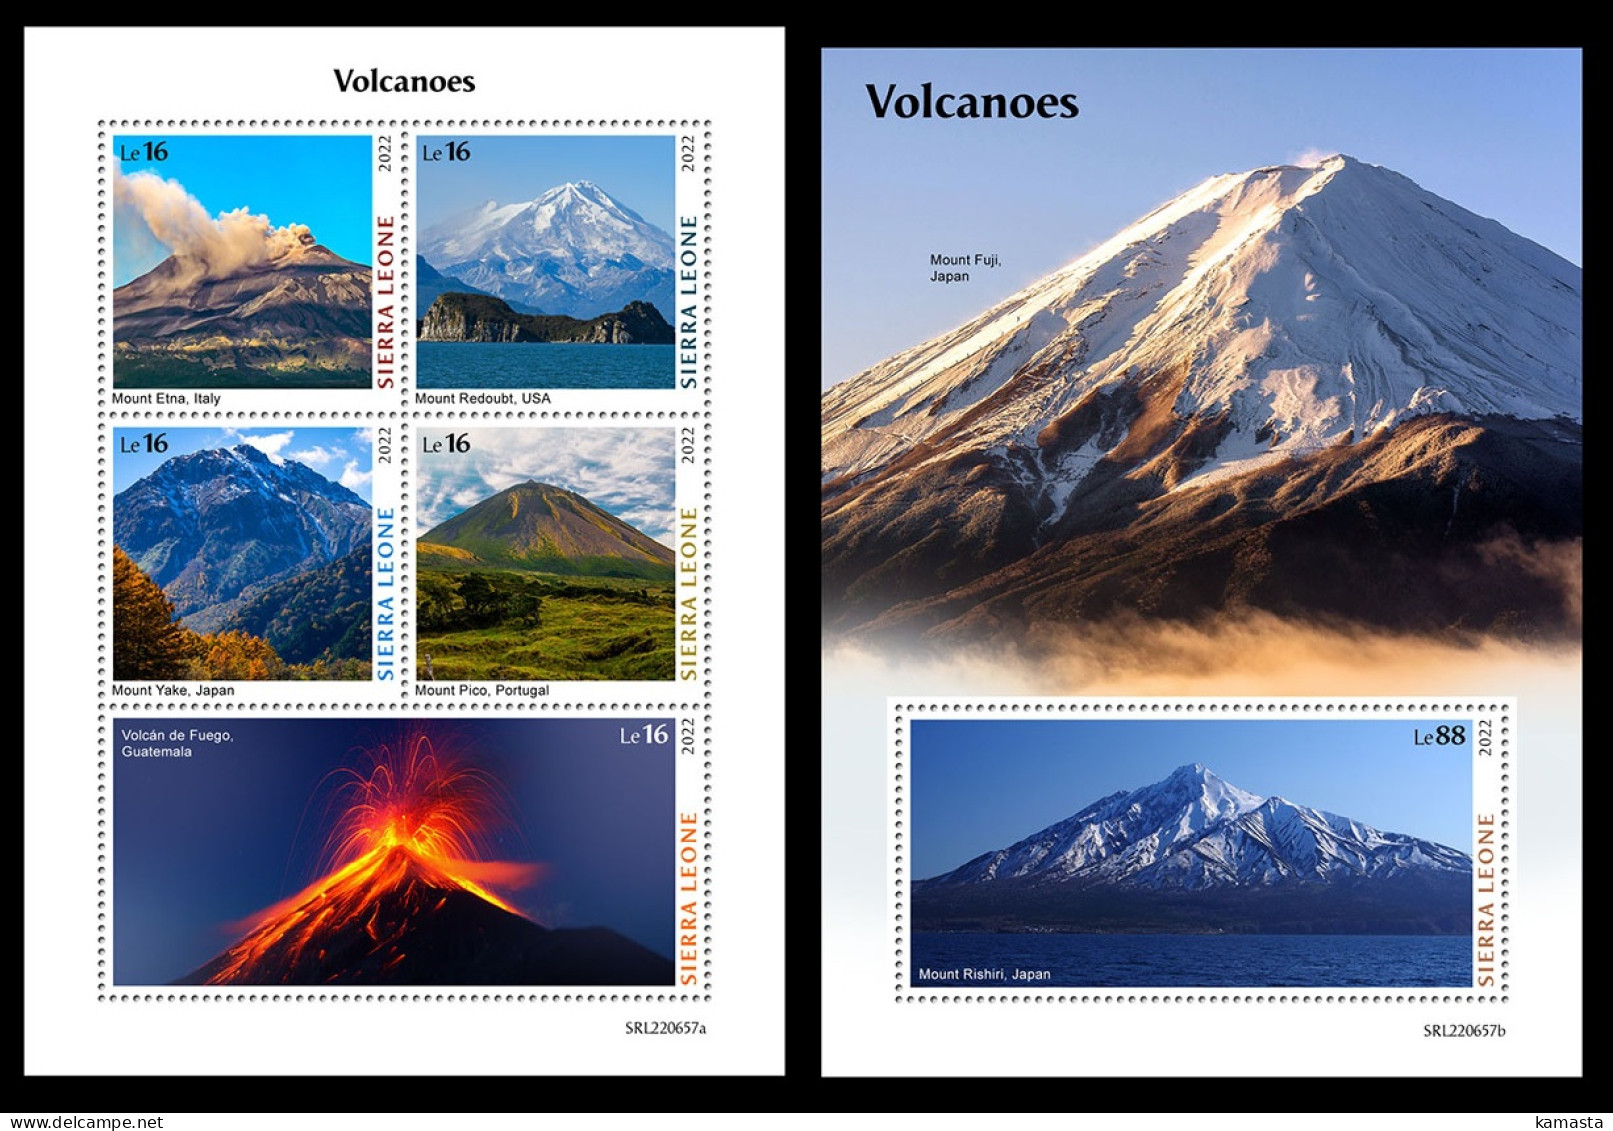 Sierra Leone  2022 Volcanoes. (657) OFFICIAL ISSUE - Volcanes